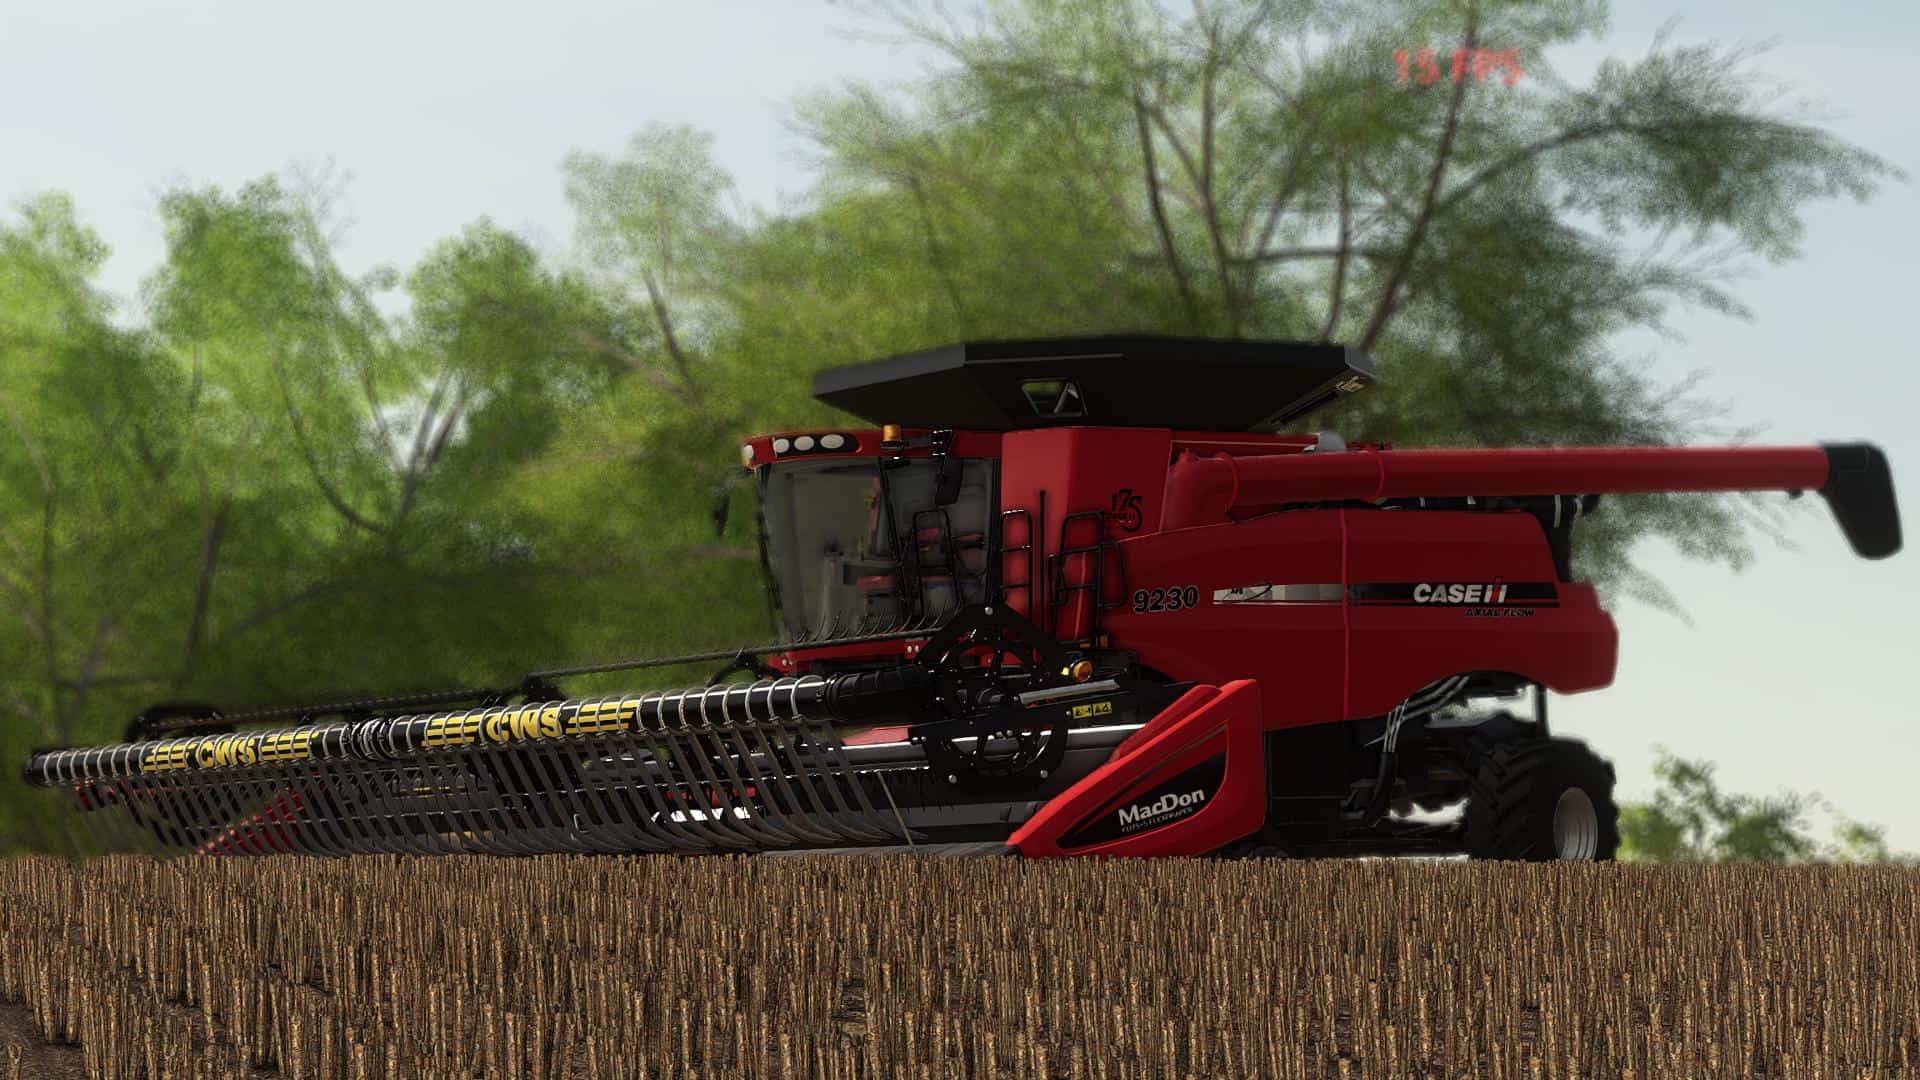 FS19 Case IH 8120-9230 Axial Flow Series v1.0 - FS 19 Combines Mod Download...